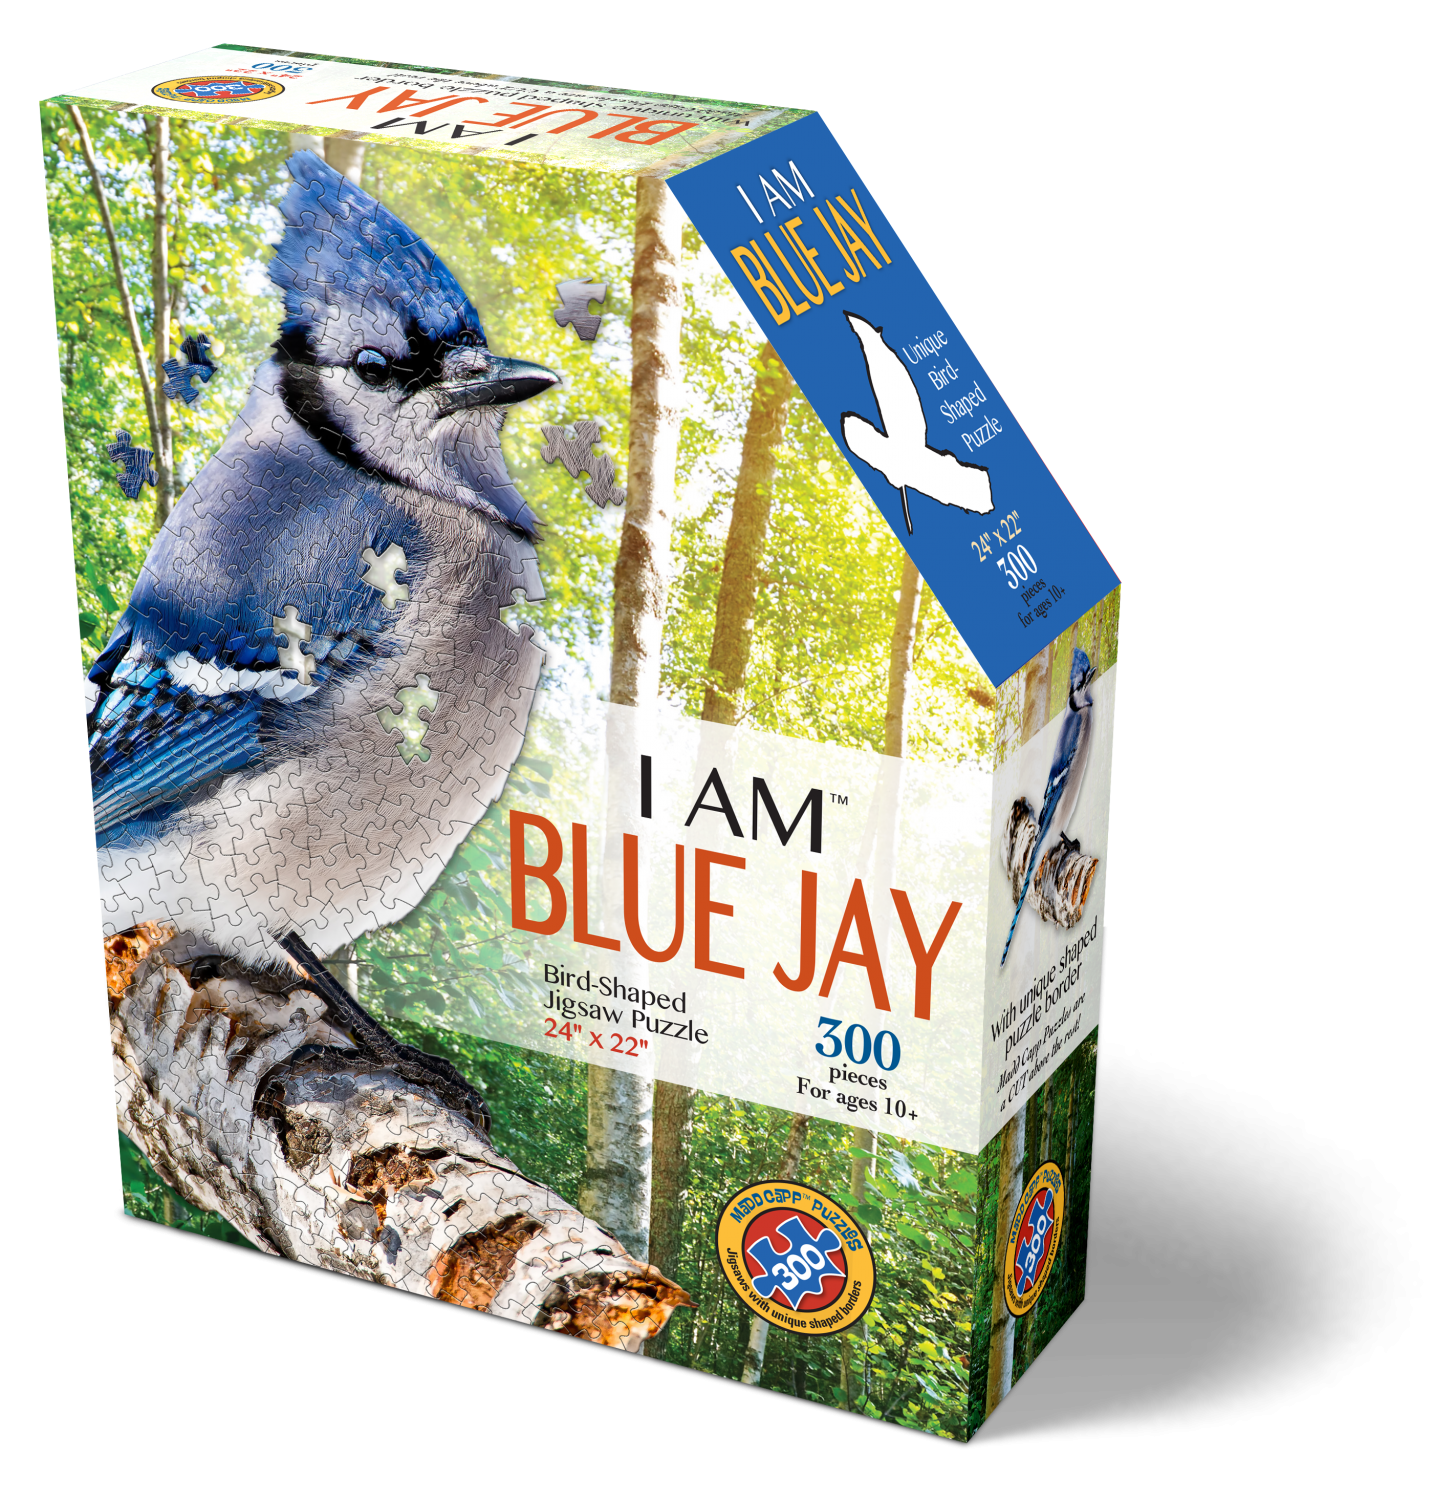 Table Top Cafe Puzzle: 300 I AM Blue Jay (Shaped)